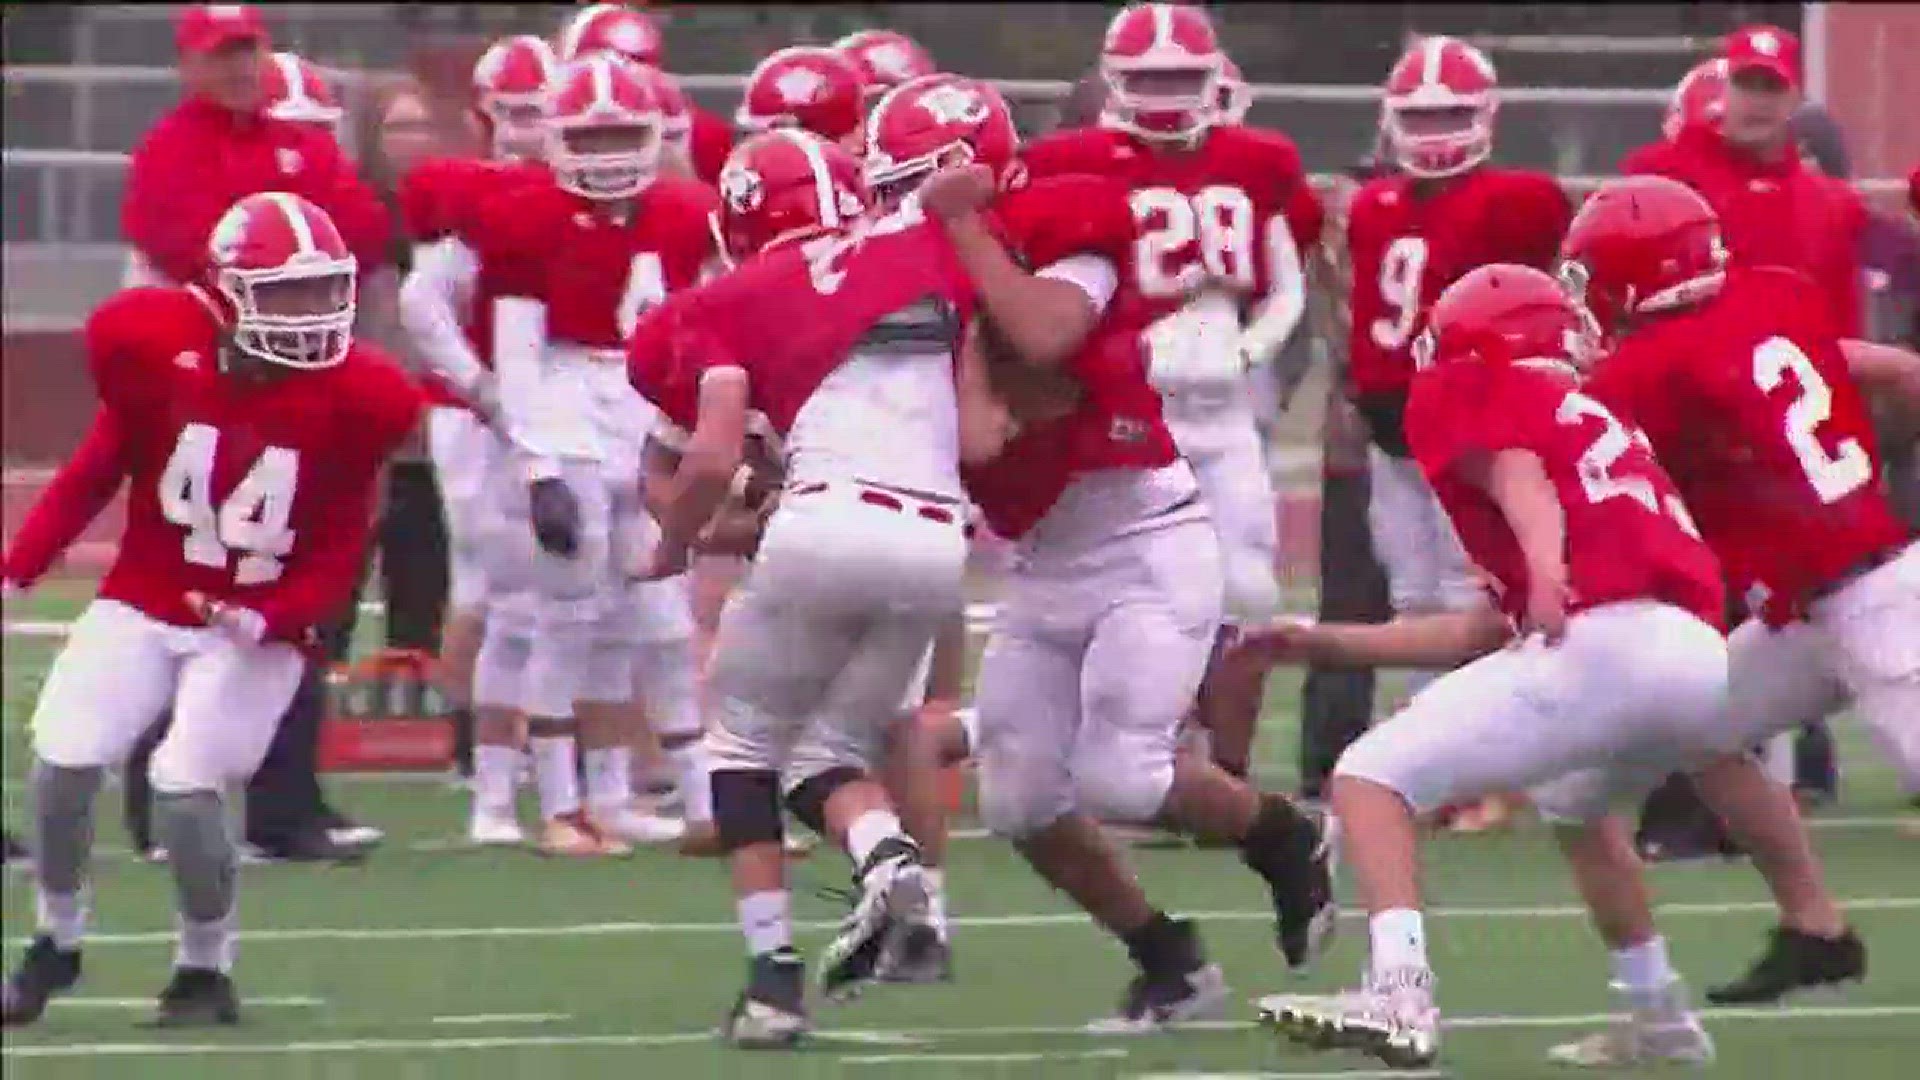 This week's Chevy Spotlight features the El Campo football program. Also, a look at Thursday night football highlights.